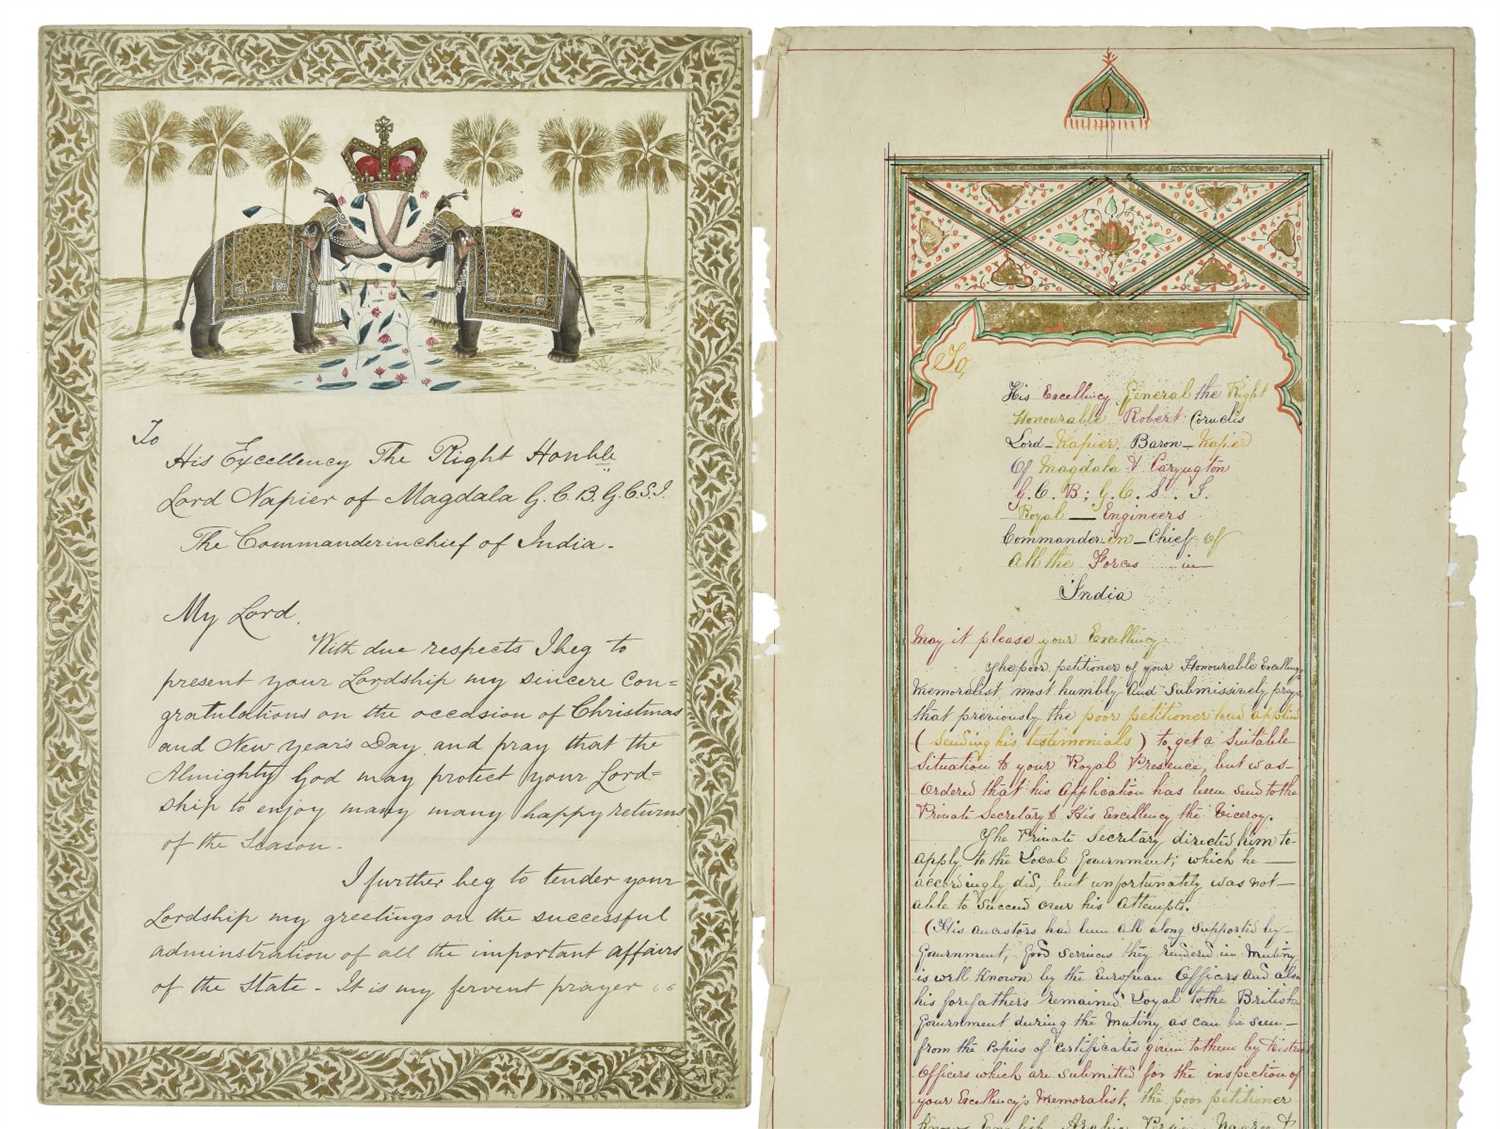 Lot 268 - India. Two illuminated letters to Robert Napier as commander-in-chief, India, 1873-6